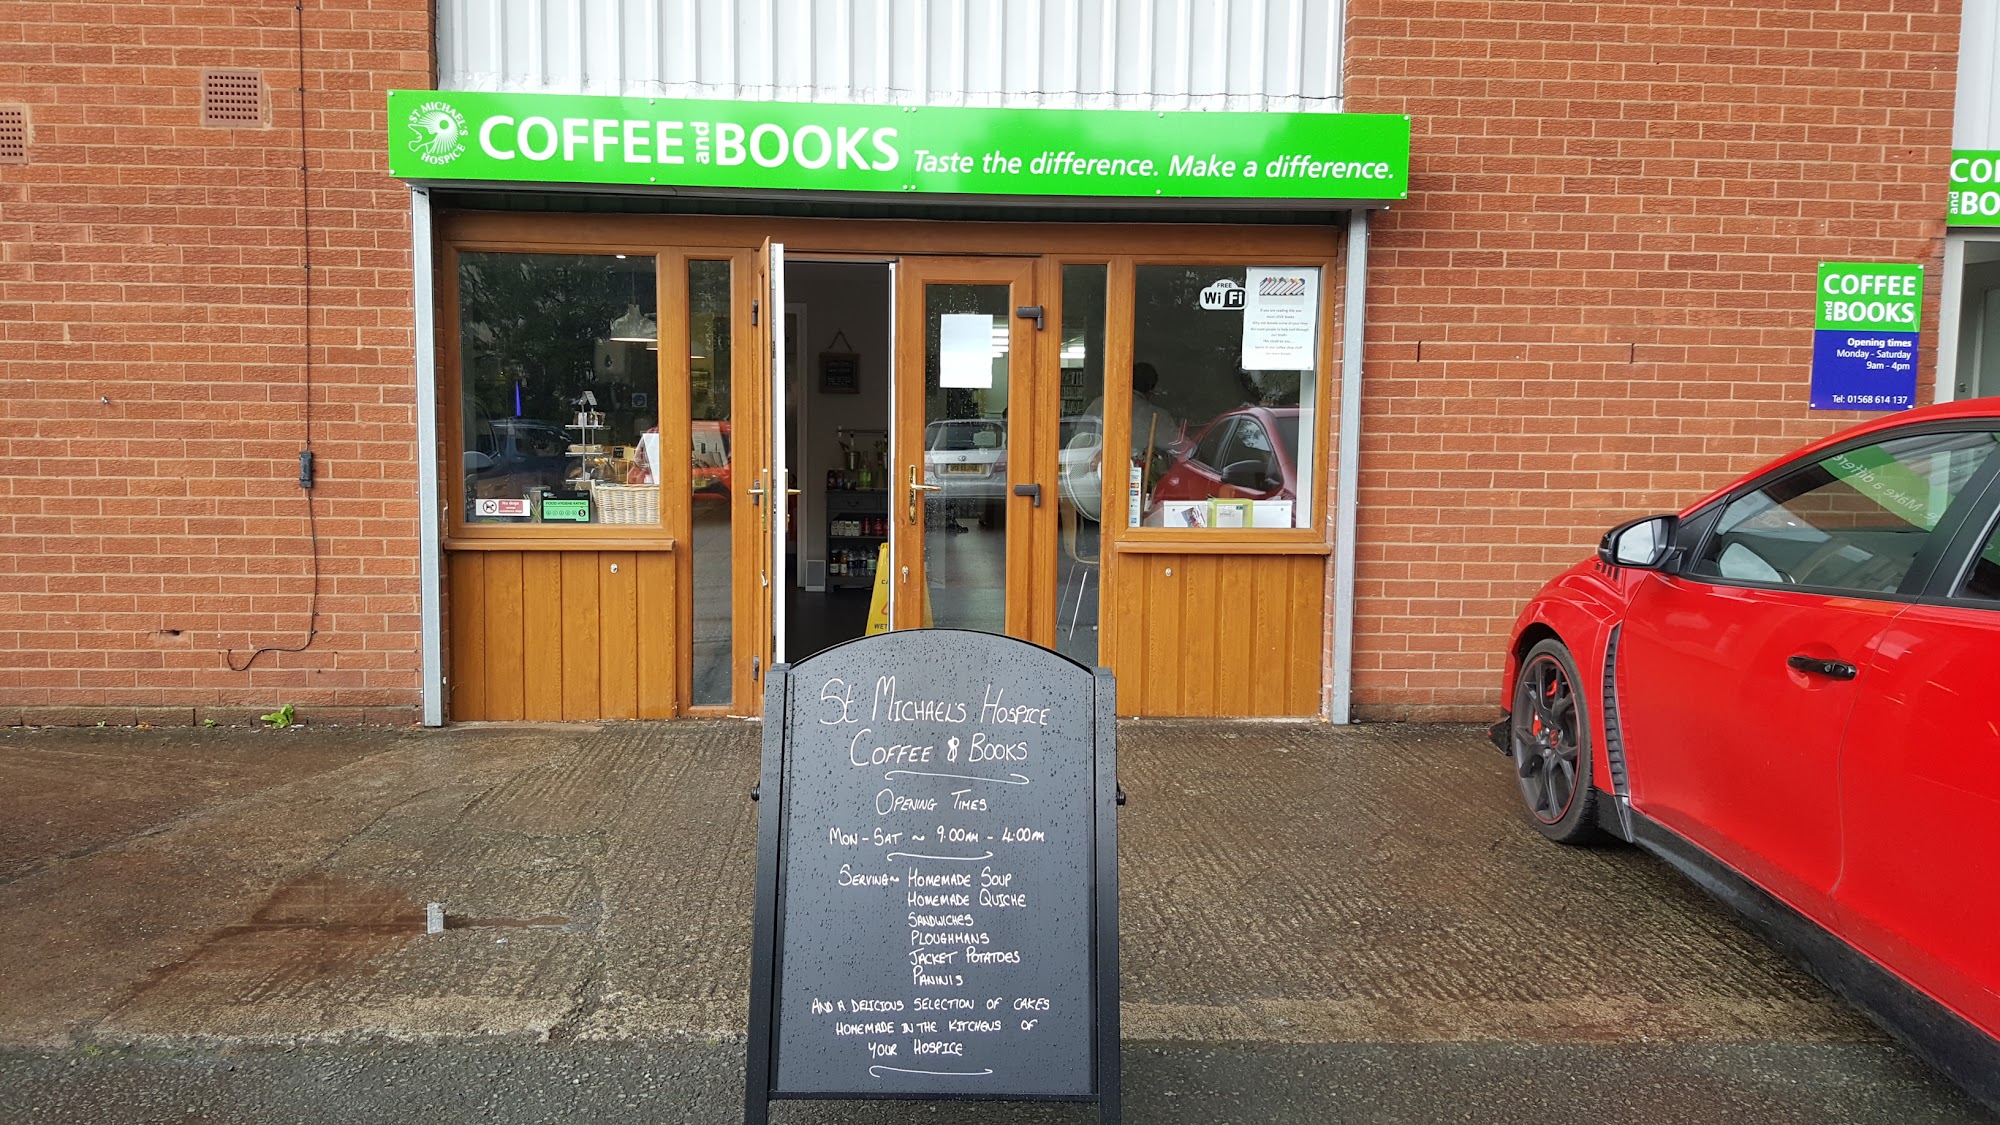 St Michael's Hospice Coffee and Books